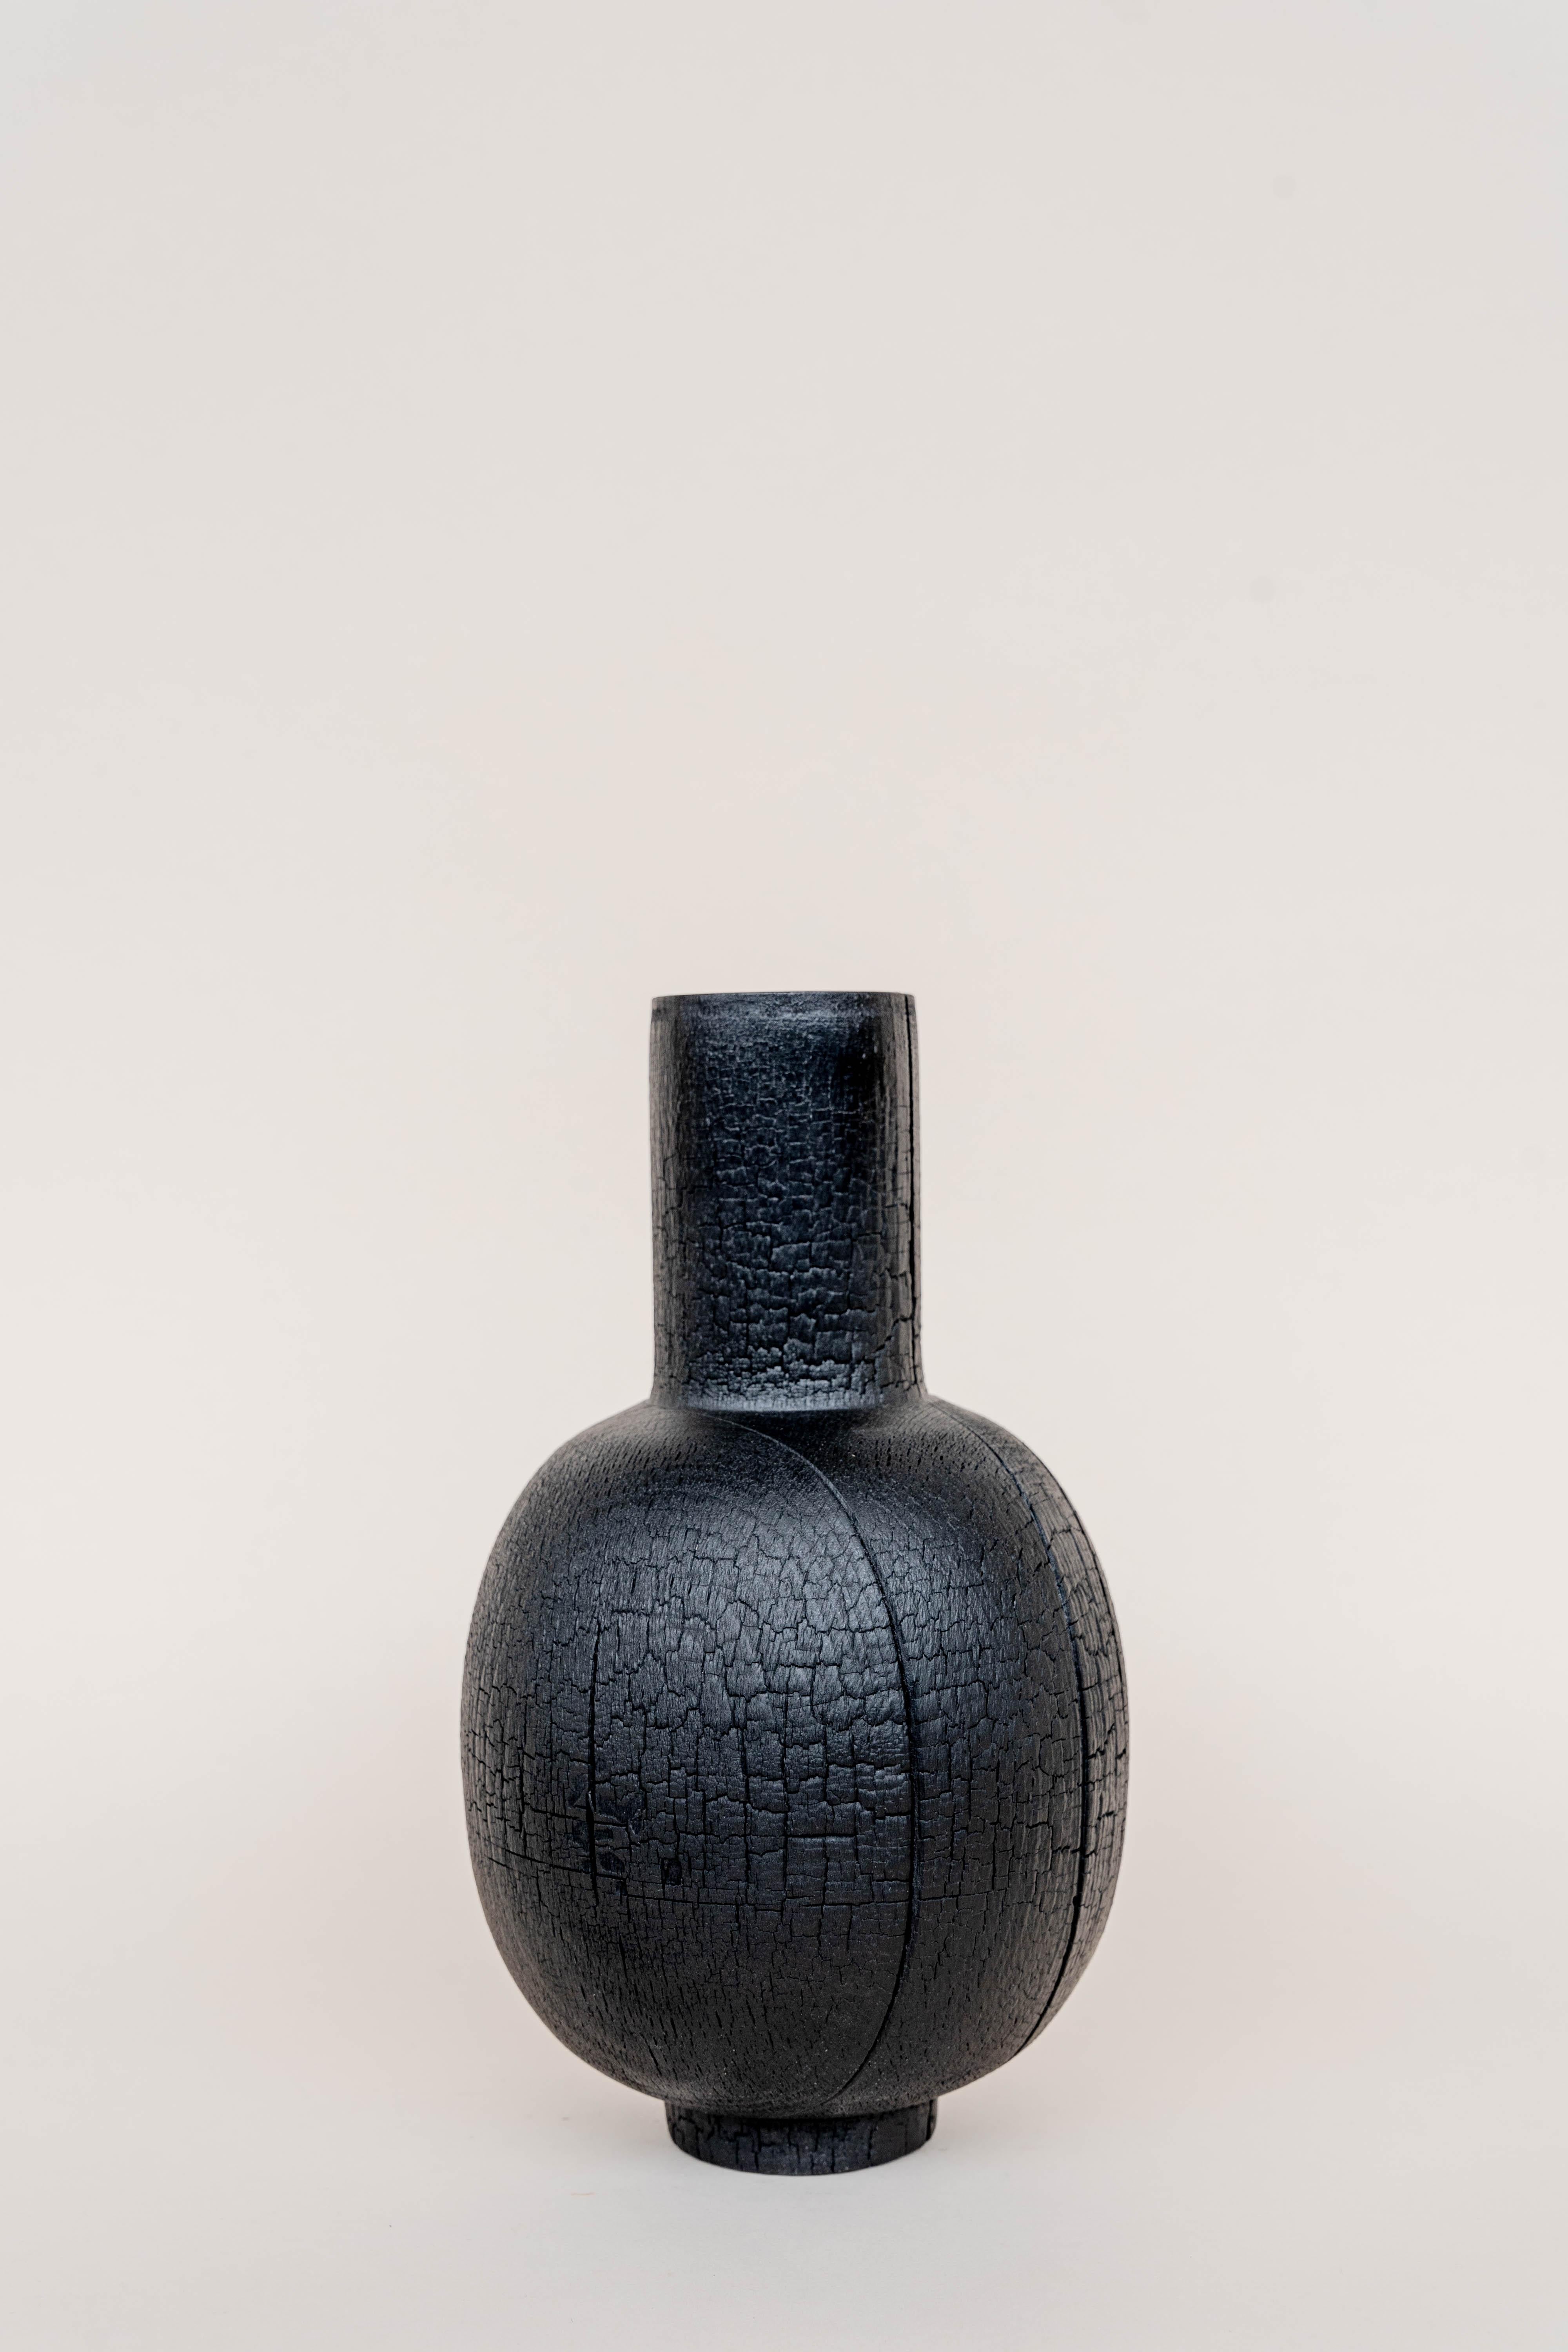 Burnt vase XL #4 by Daniel Elkayam
One of a Kind
Dimensions: D 15 x W 15 x H 45 cm 
Materials: Burnt beech wood


Jerusalem-born Art-designer and Photographer based in Tel-Aviv. Operating in the field of sustainable home decor and specializing